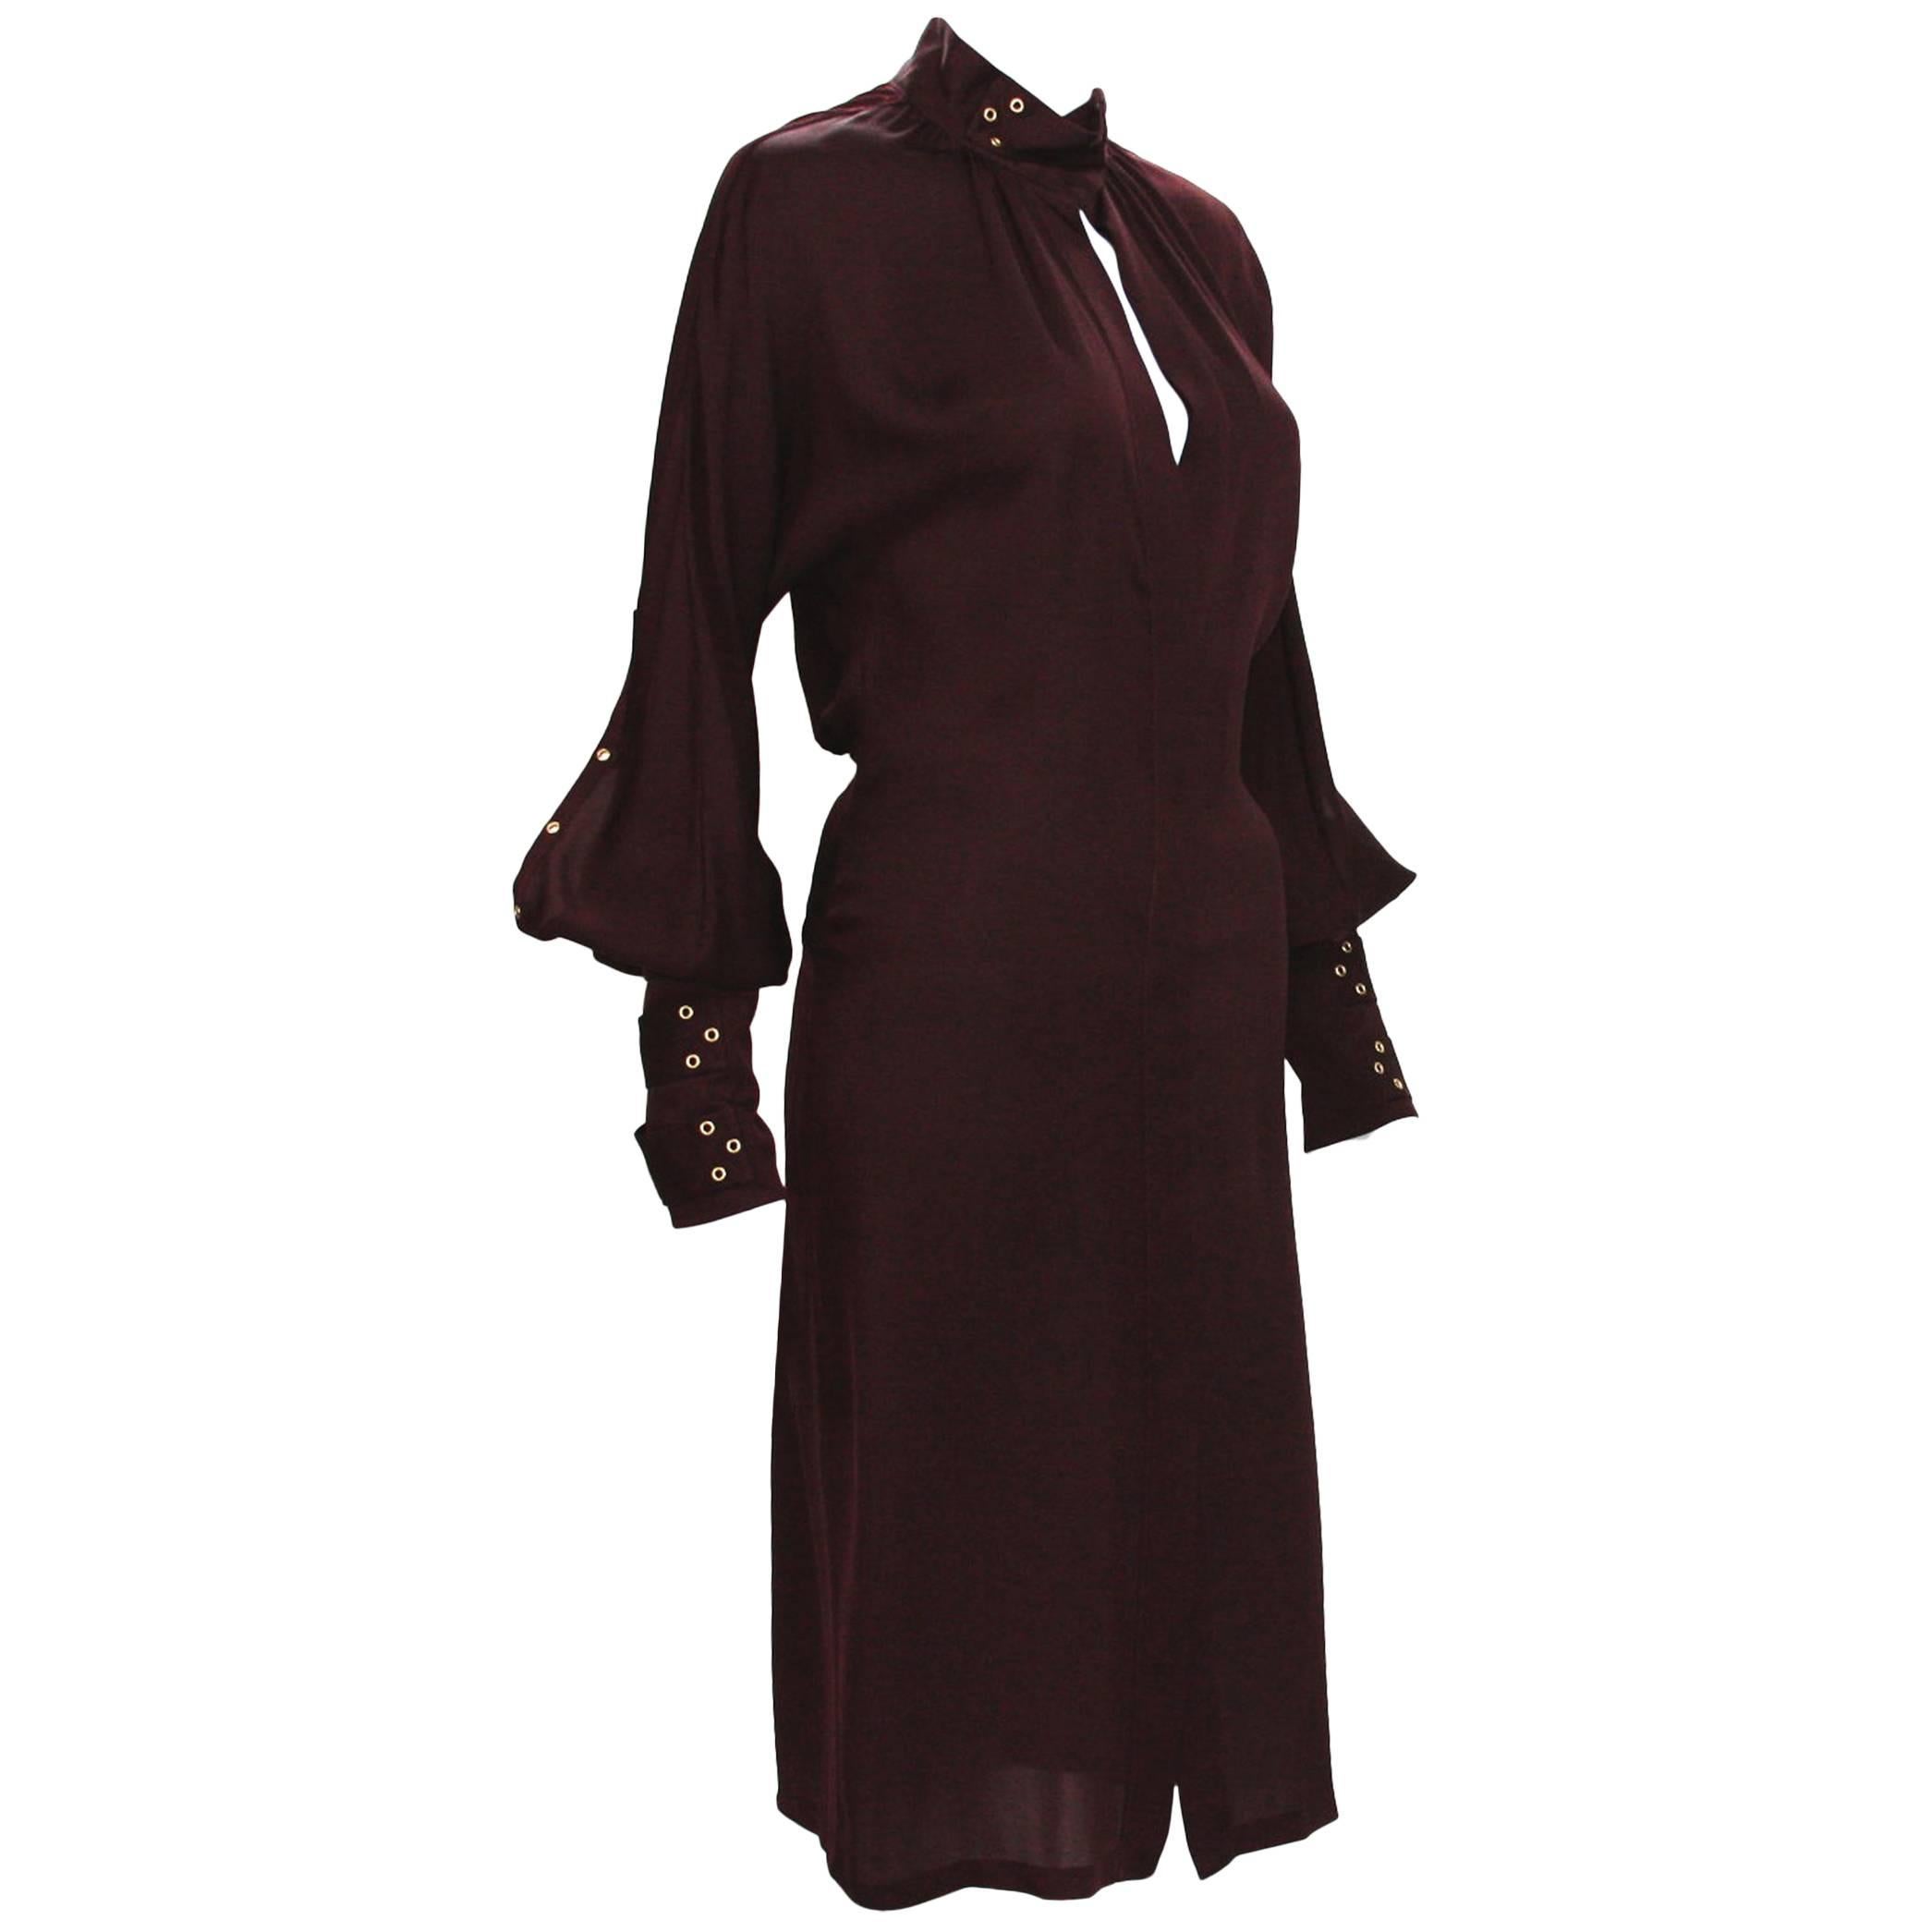 Tom Ford for Gucci 2003 Collection 3x Buckle Grommet Sleeve Burgundy Dress 40 -  For Sale